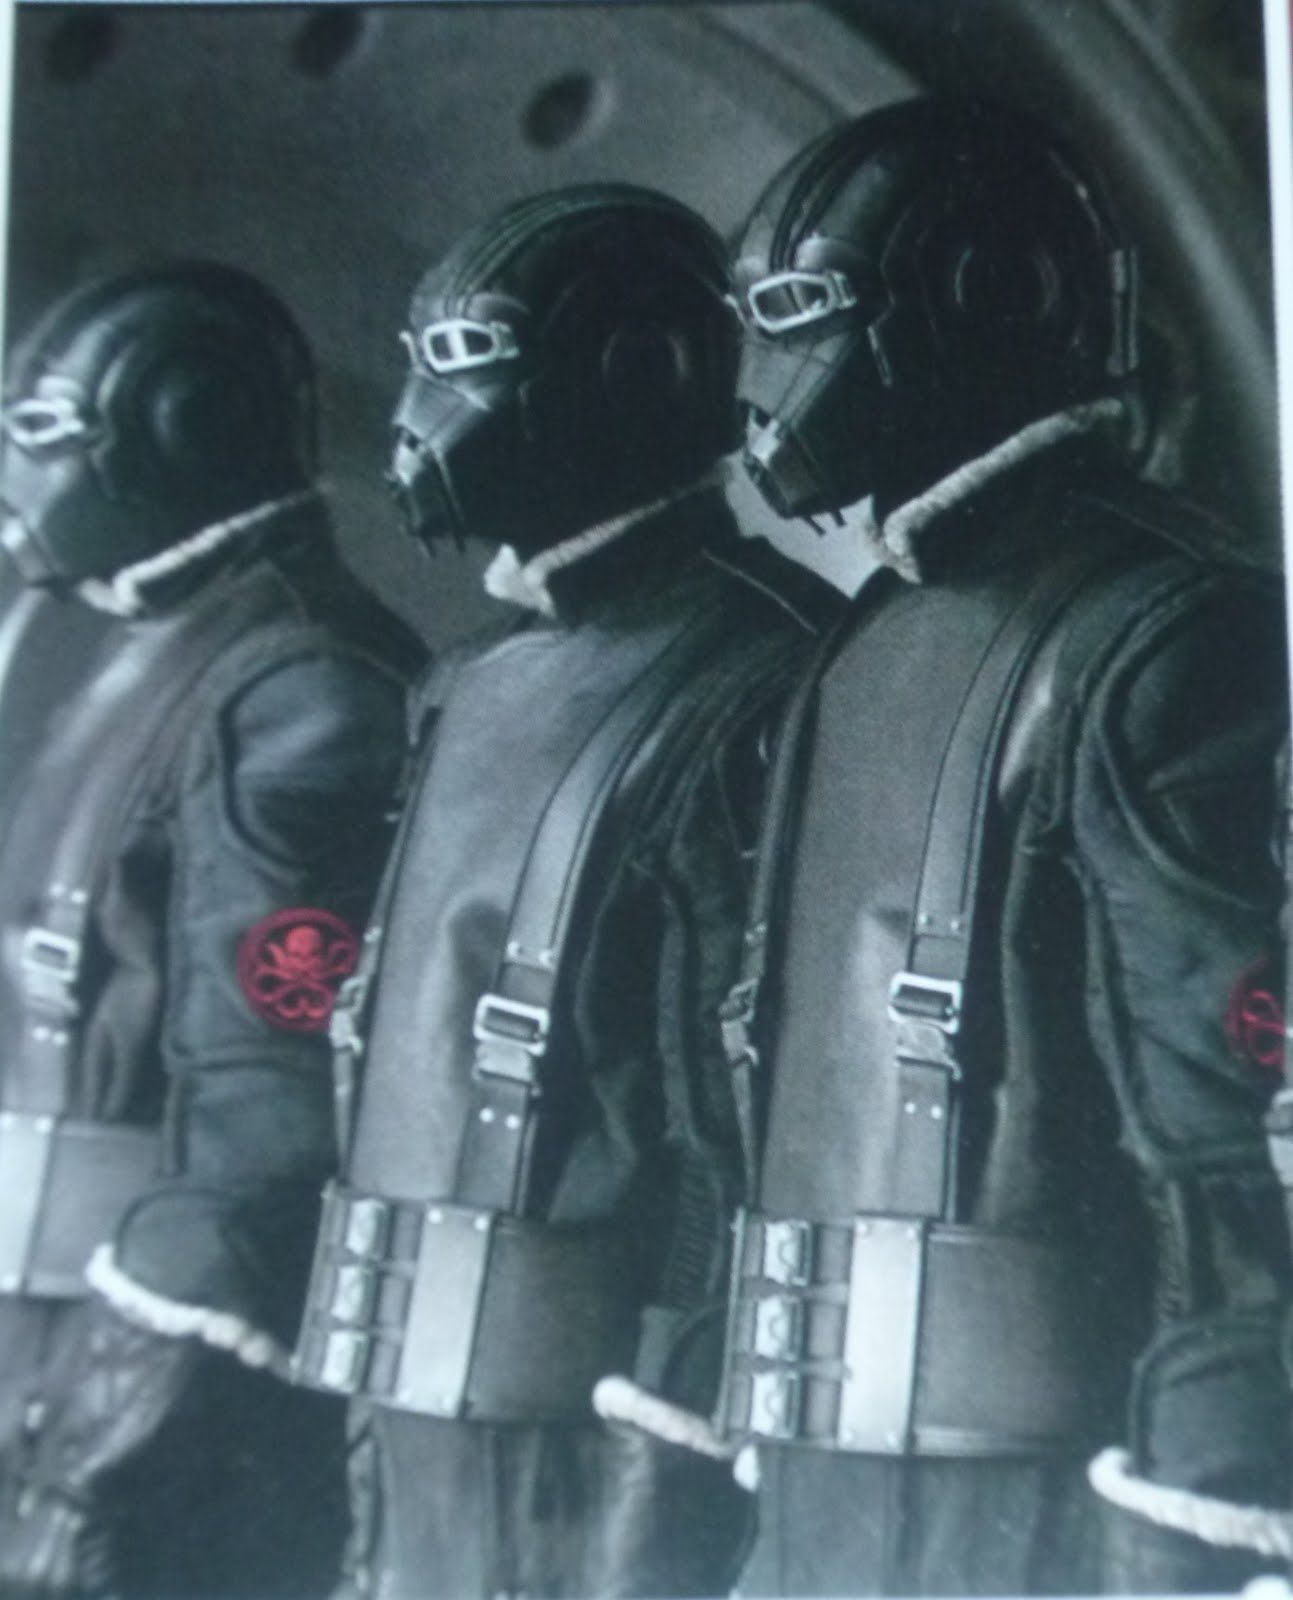 The Hydra soldiers in Captain America: The First Avenger